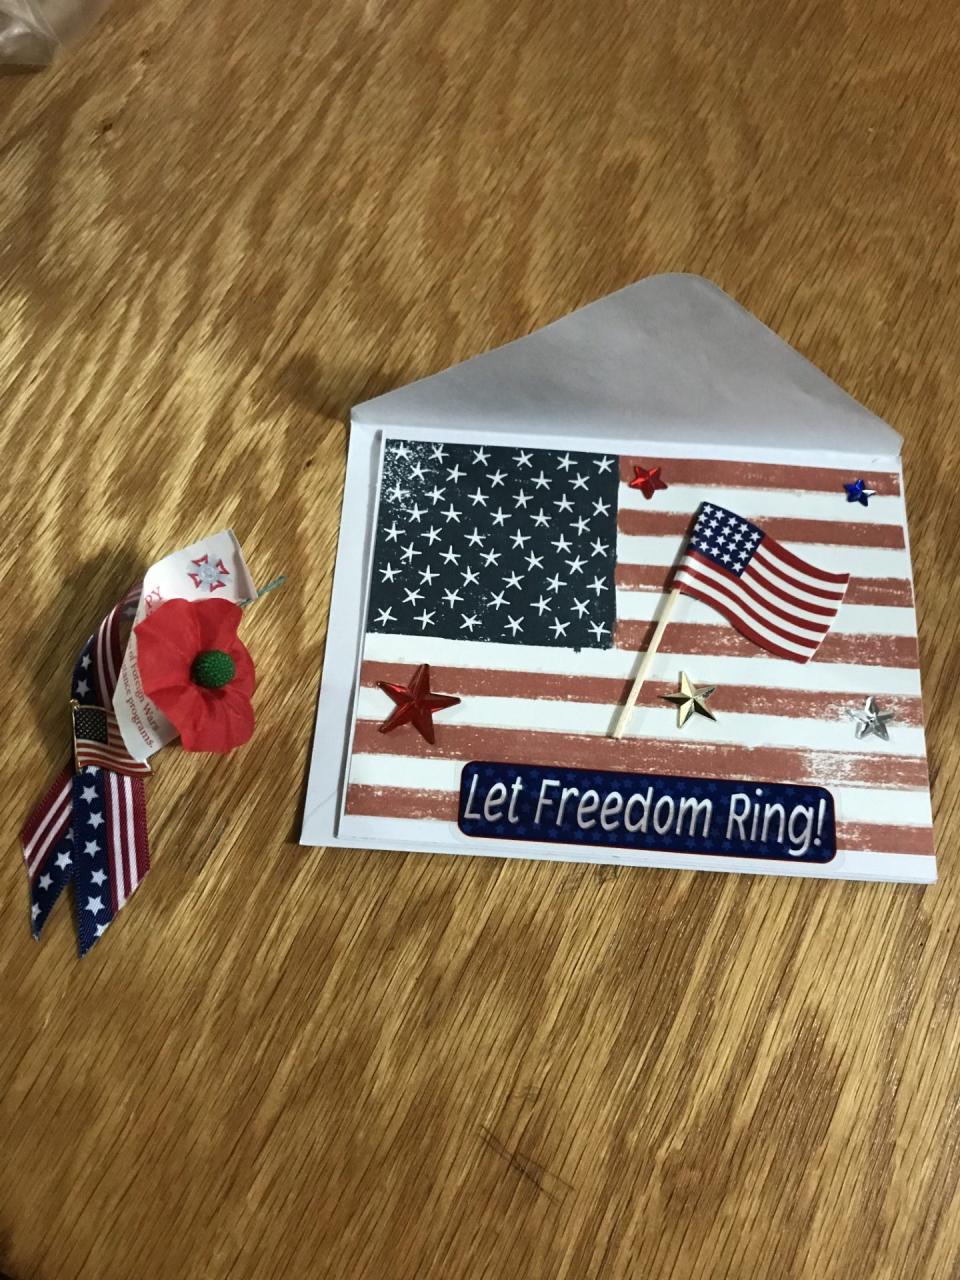 Lapel pins and greeting cards made by April Killian will be given to all veterans attending the annual Veterans Day dinner Nov. 12 at Erie Post 3925, Veterans of Foreign Wars post home.